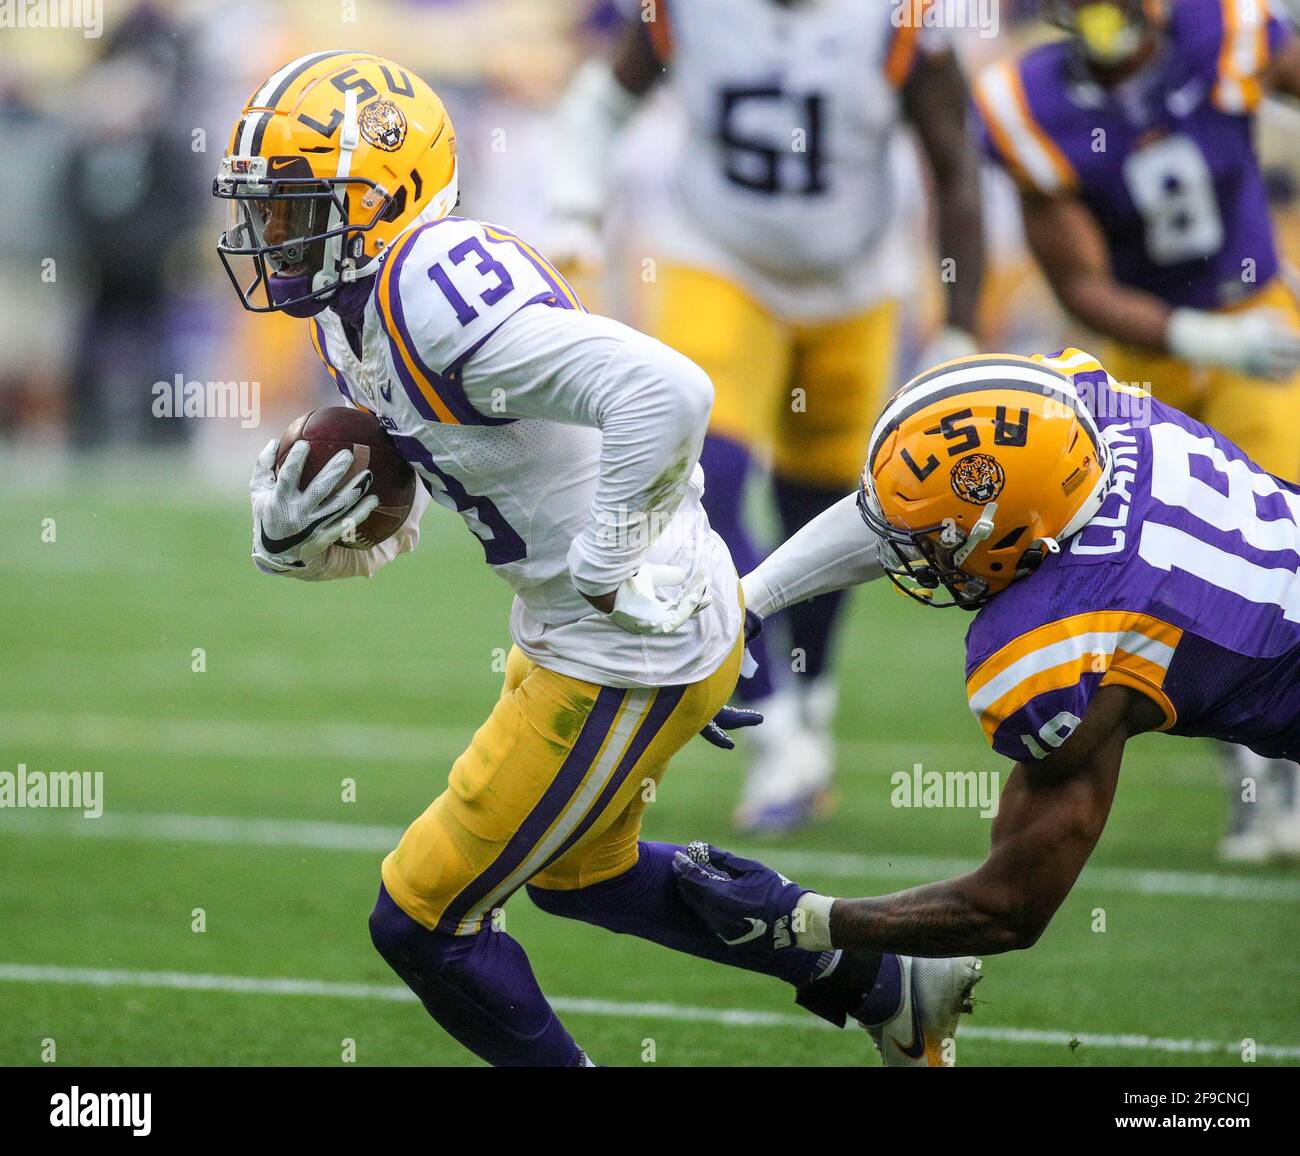 Baton Rouge, LA, USA. 17th Apr, 2021. LSU receiver Kontre Kirklin (13) looks for the endzone as linebacker Damone Clark (18) tries to stop him during the National L Club LSU Spring Game at Tiger Stadium in Baton Rouge, LA. Jonathan Mailhes/CSM/Alamy Live News Stock Photo